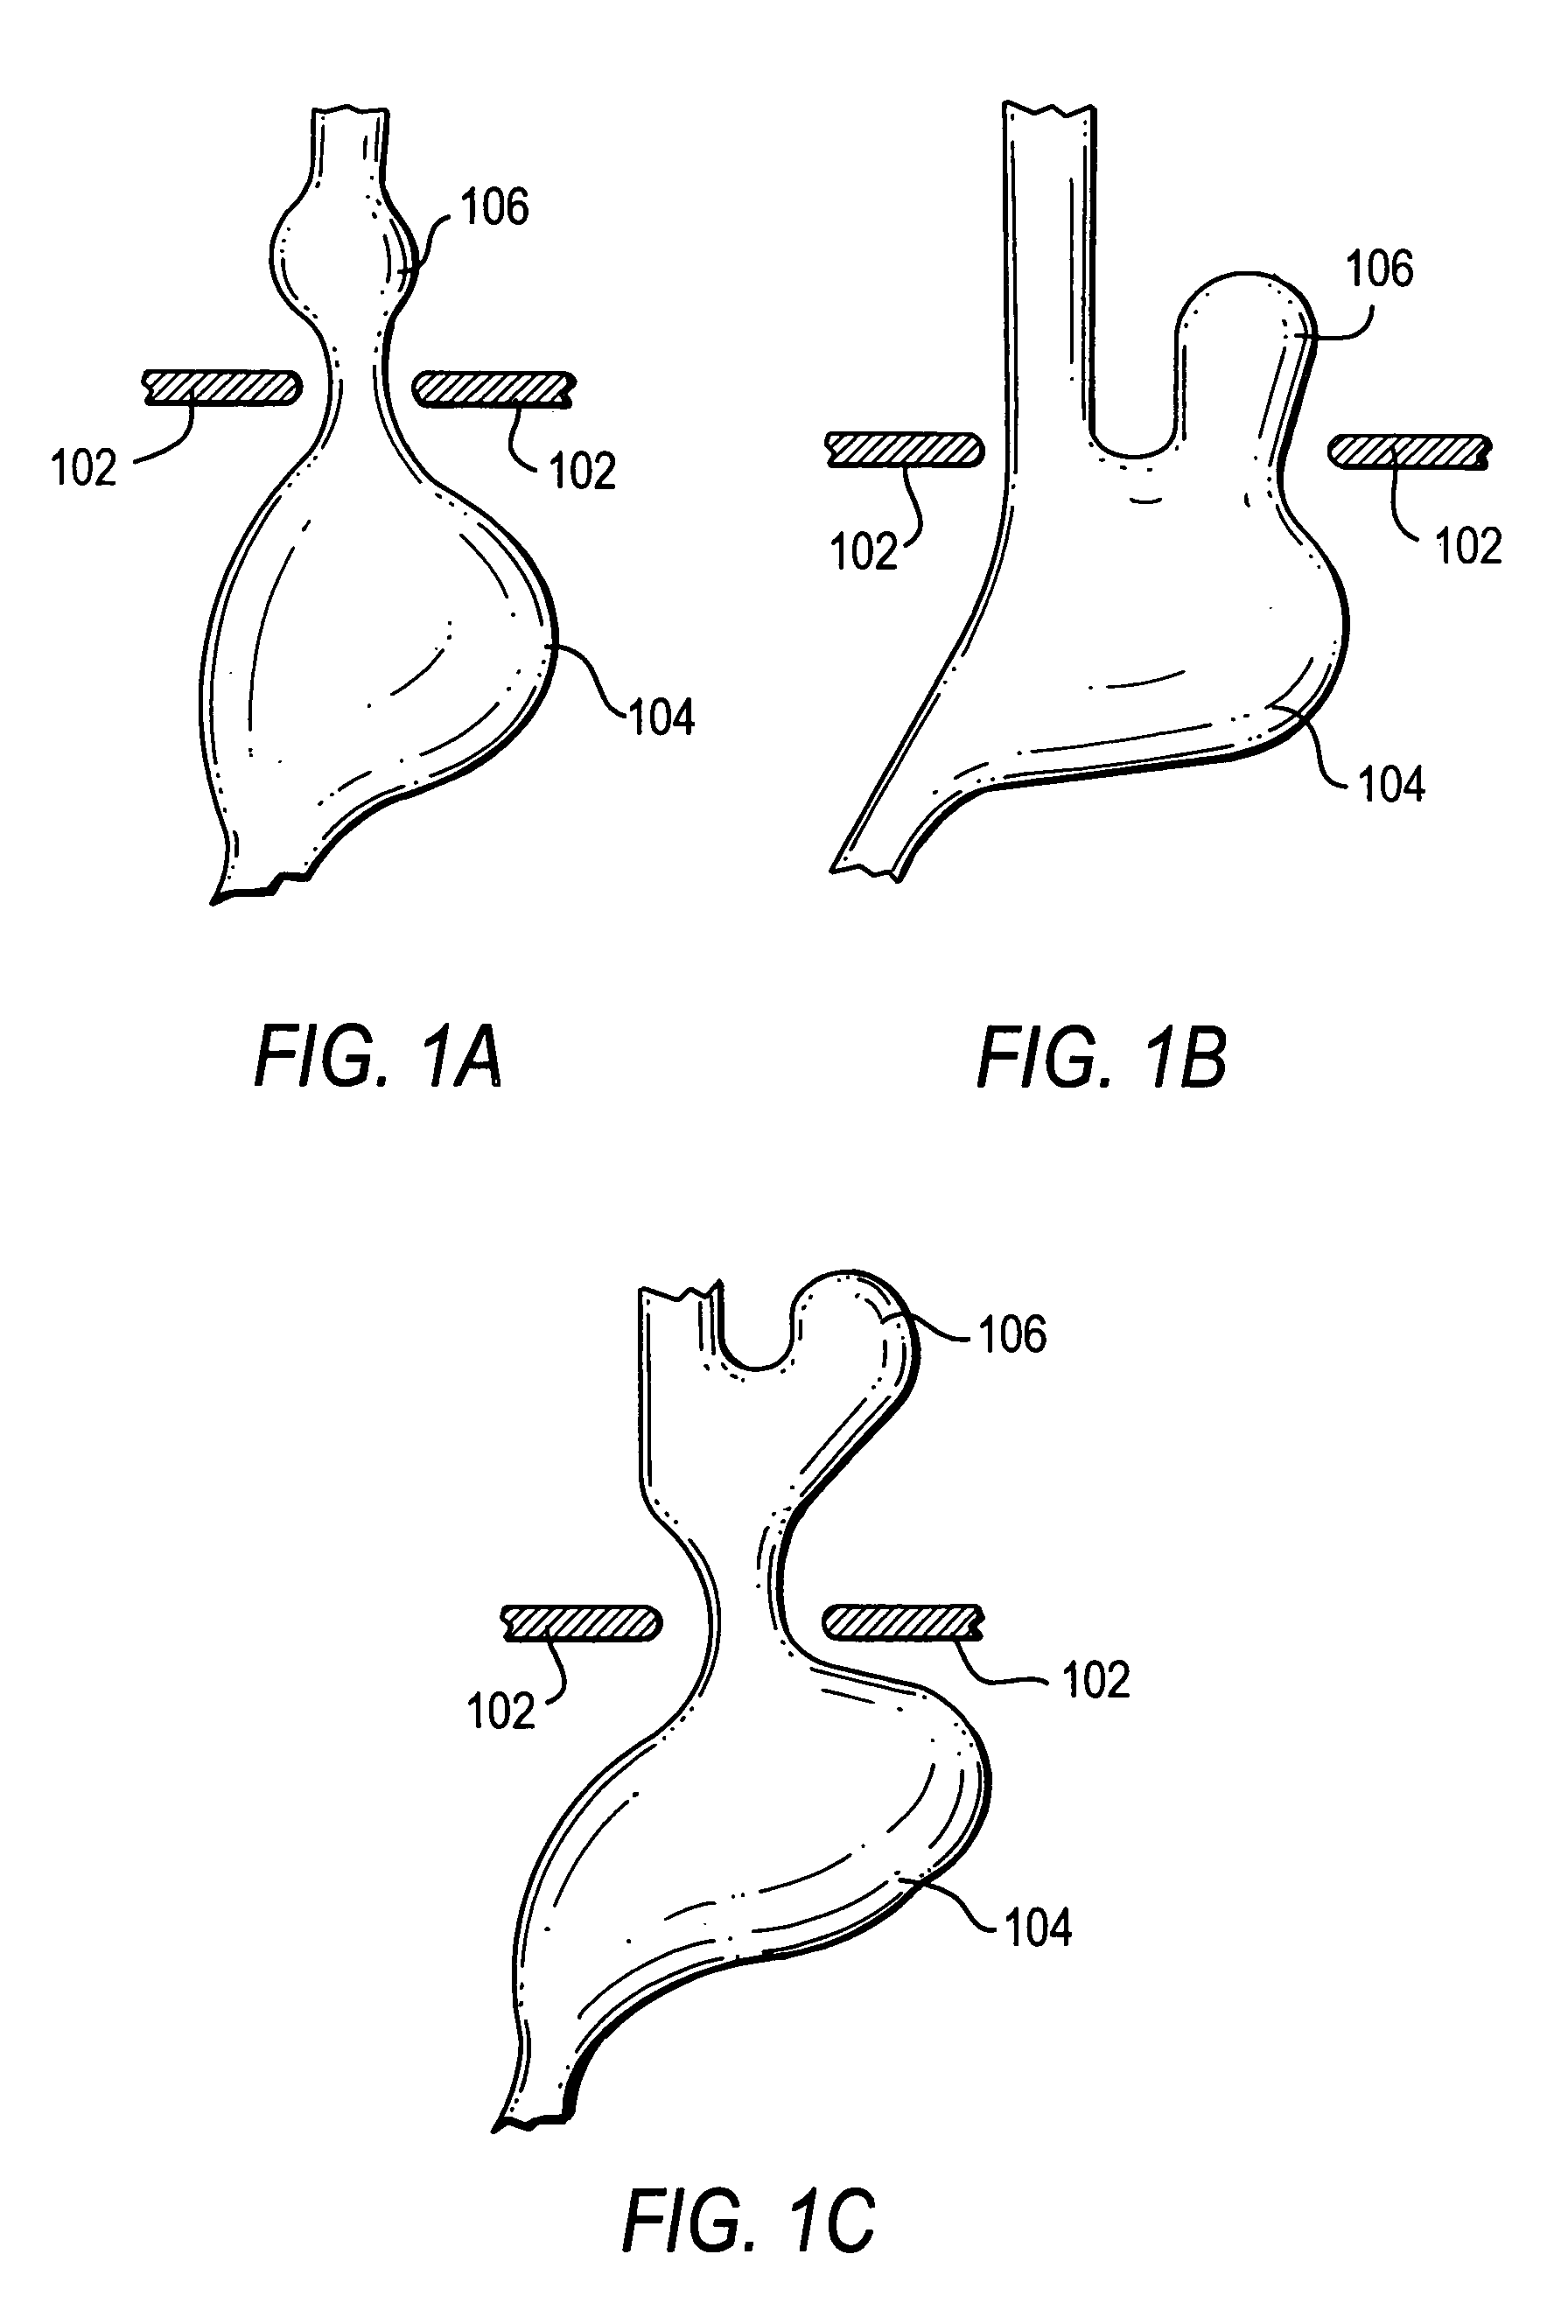 Methods and apparatus for improving the function of biological passages